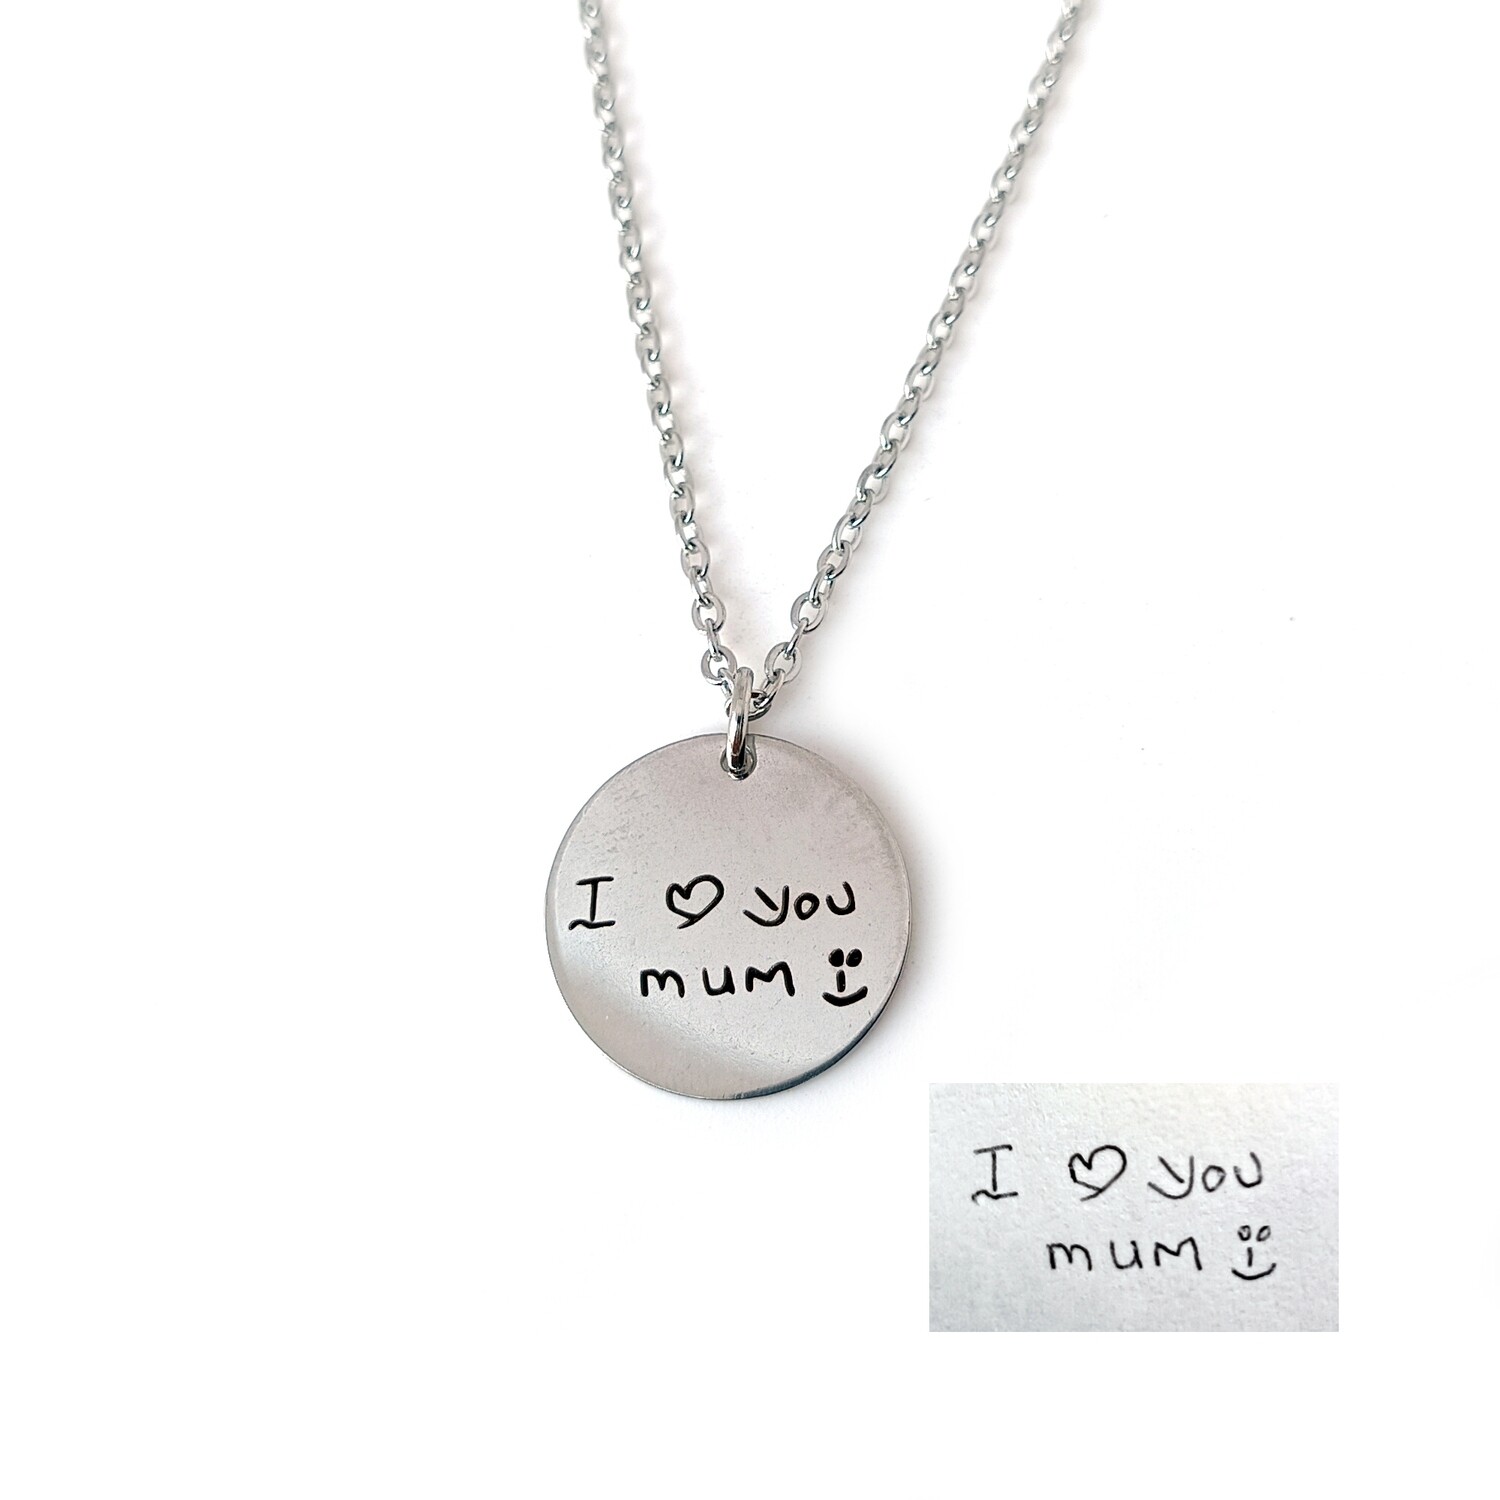 Personalised Handwriting Tag Necklace